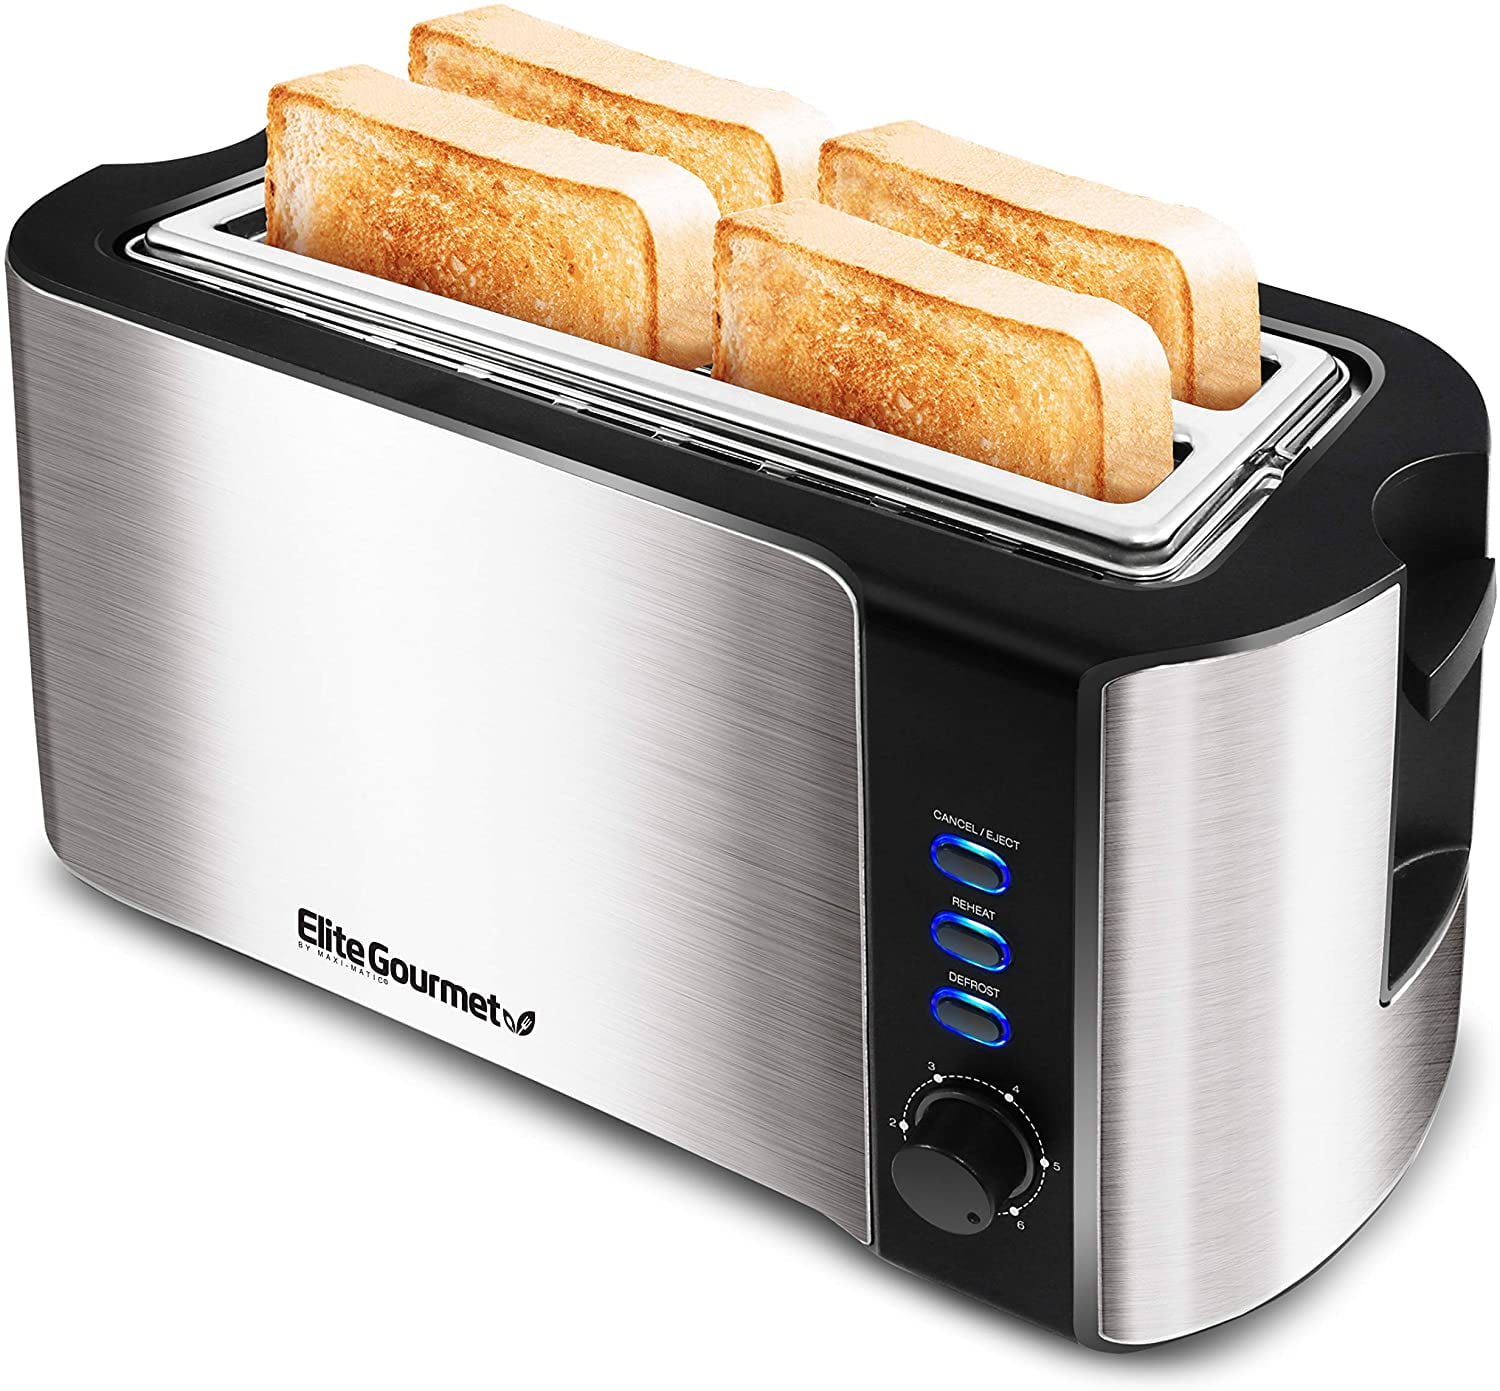 PREMIUM BLACK 1300W 4-SLICE COOL TOUCH TOASTER w/ CRUMB TRAY 7 BROWNING SETTINGS